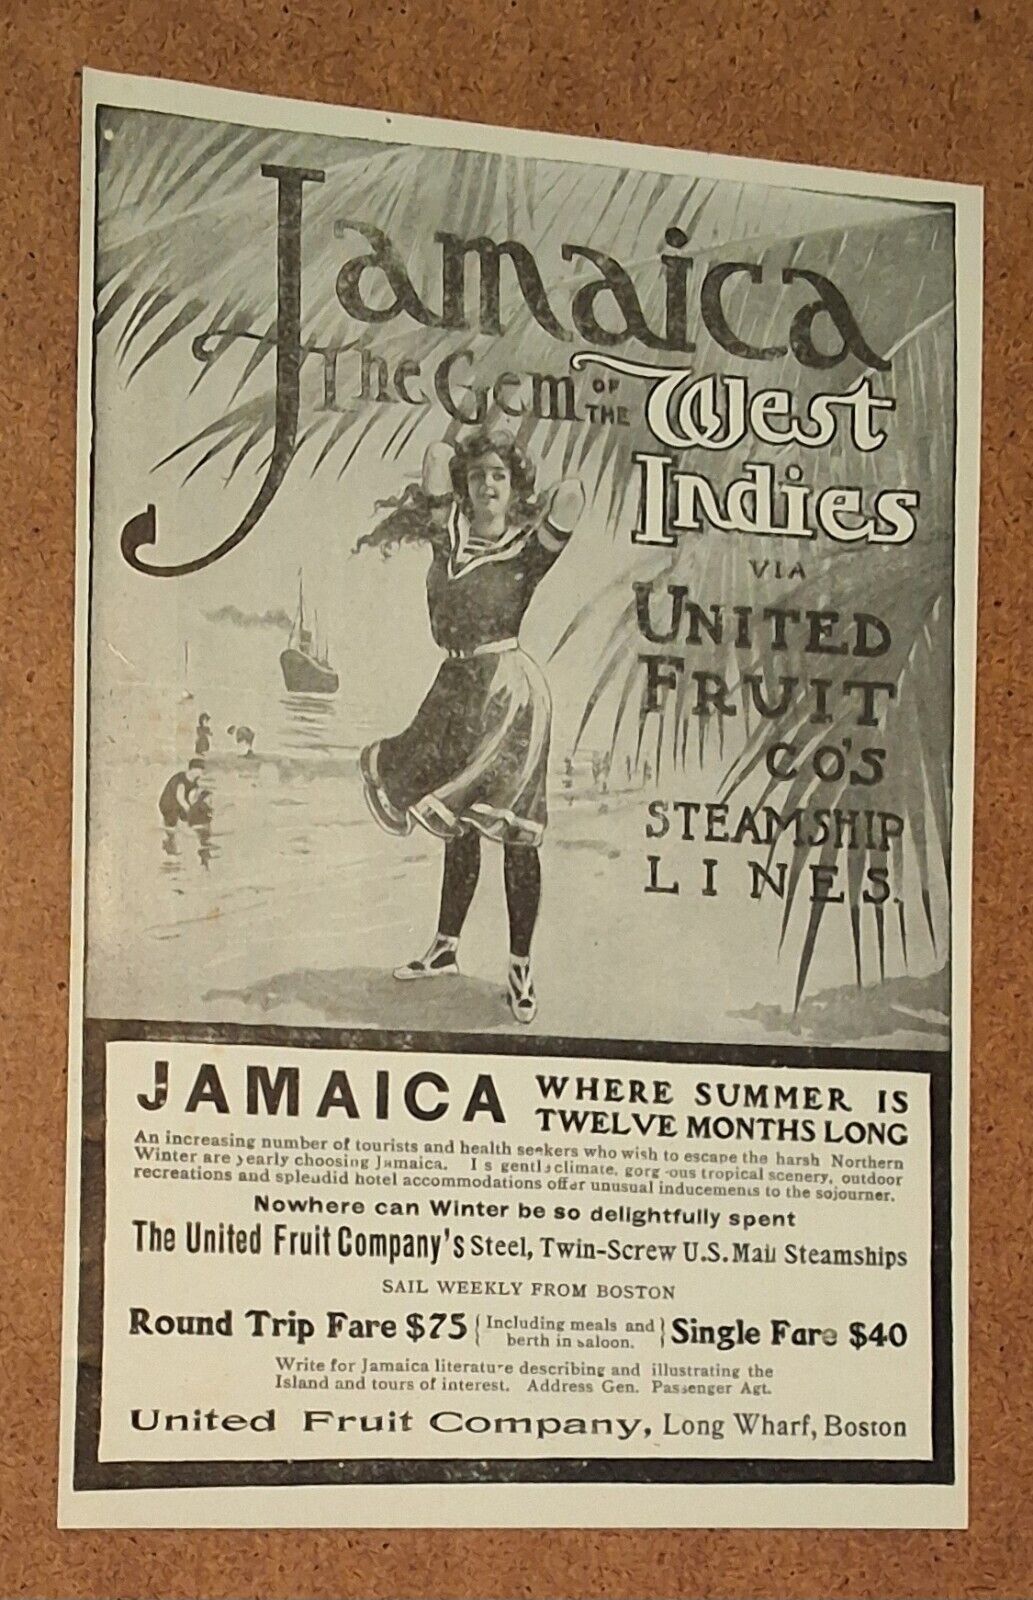 Antique Boston Travel Agency - United Fruit Co Steamship Lines - Jamaica 1904 AD